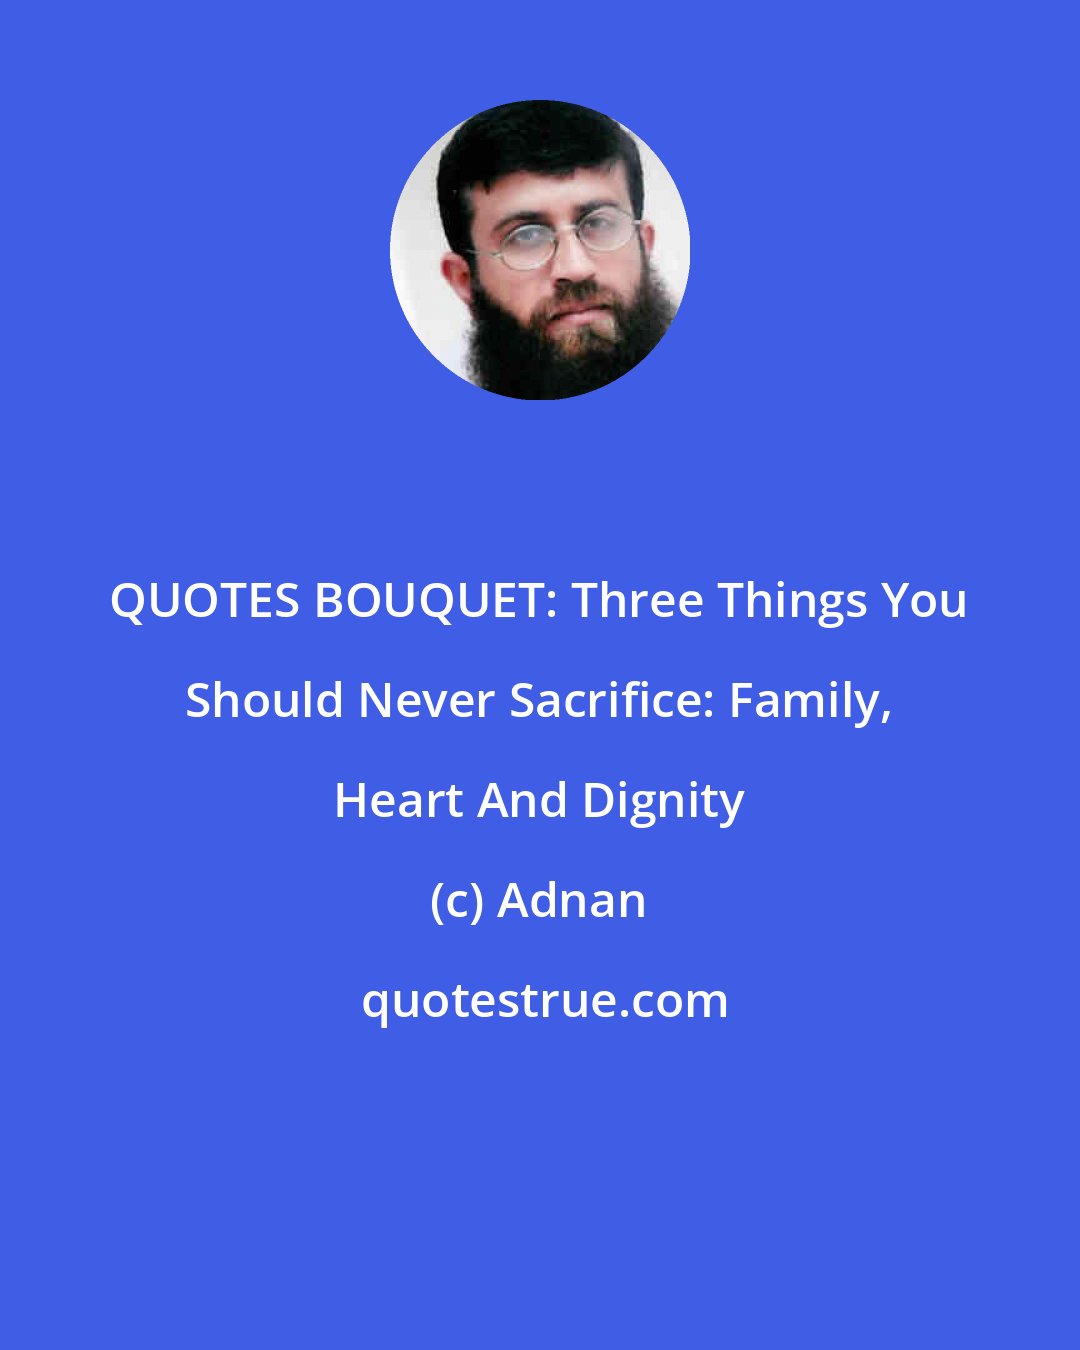 Adnan: QUOTES BOUQUET: Three Things You Should Never Sacrifice: Family, Heart And Dignity